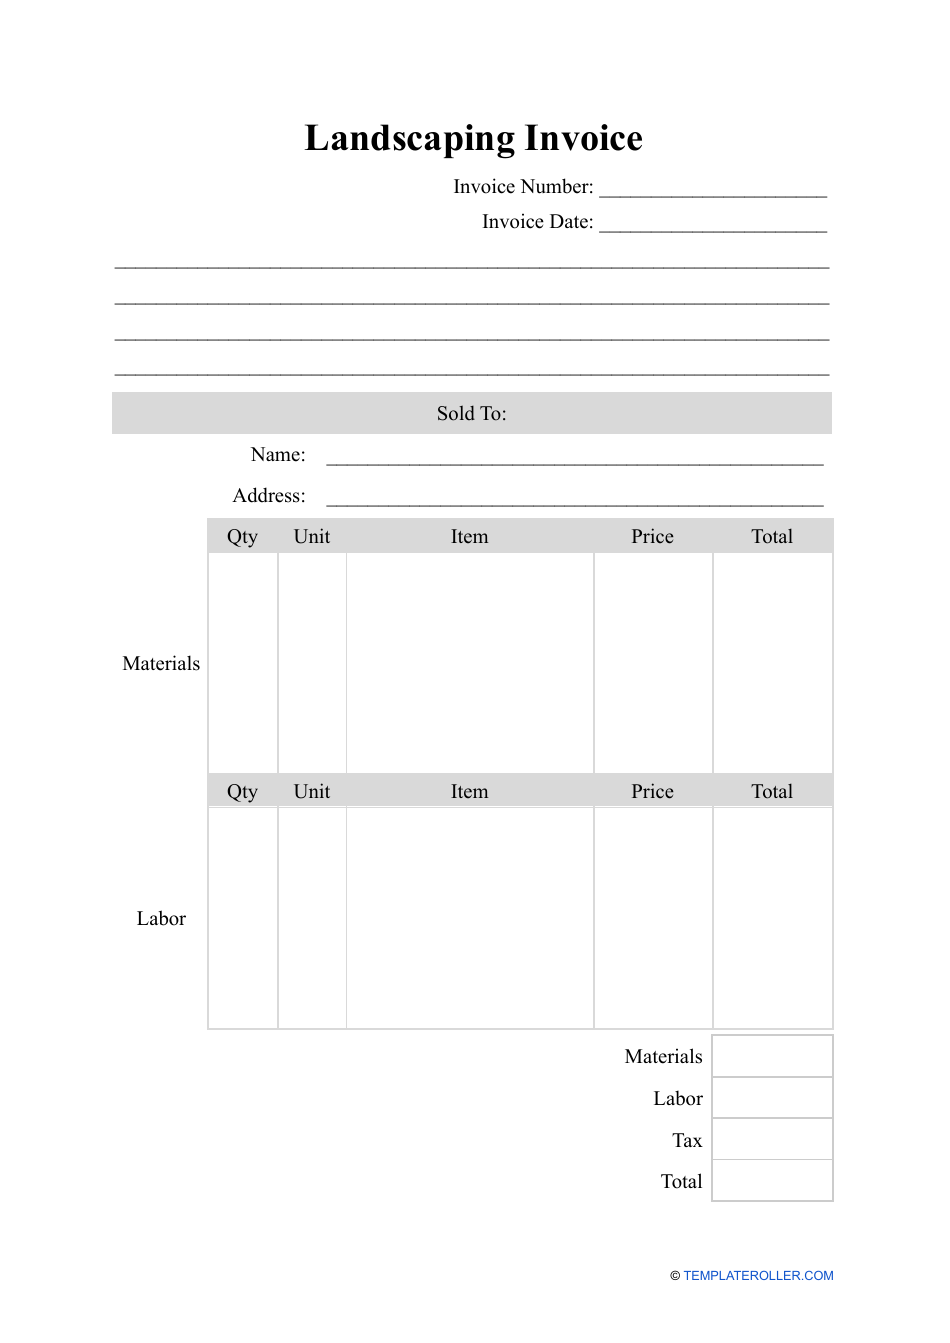 Landscaping Invoice Template, Page 1